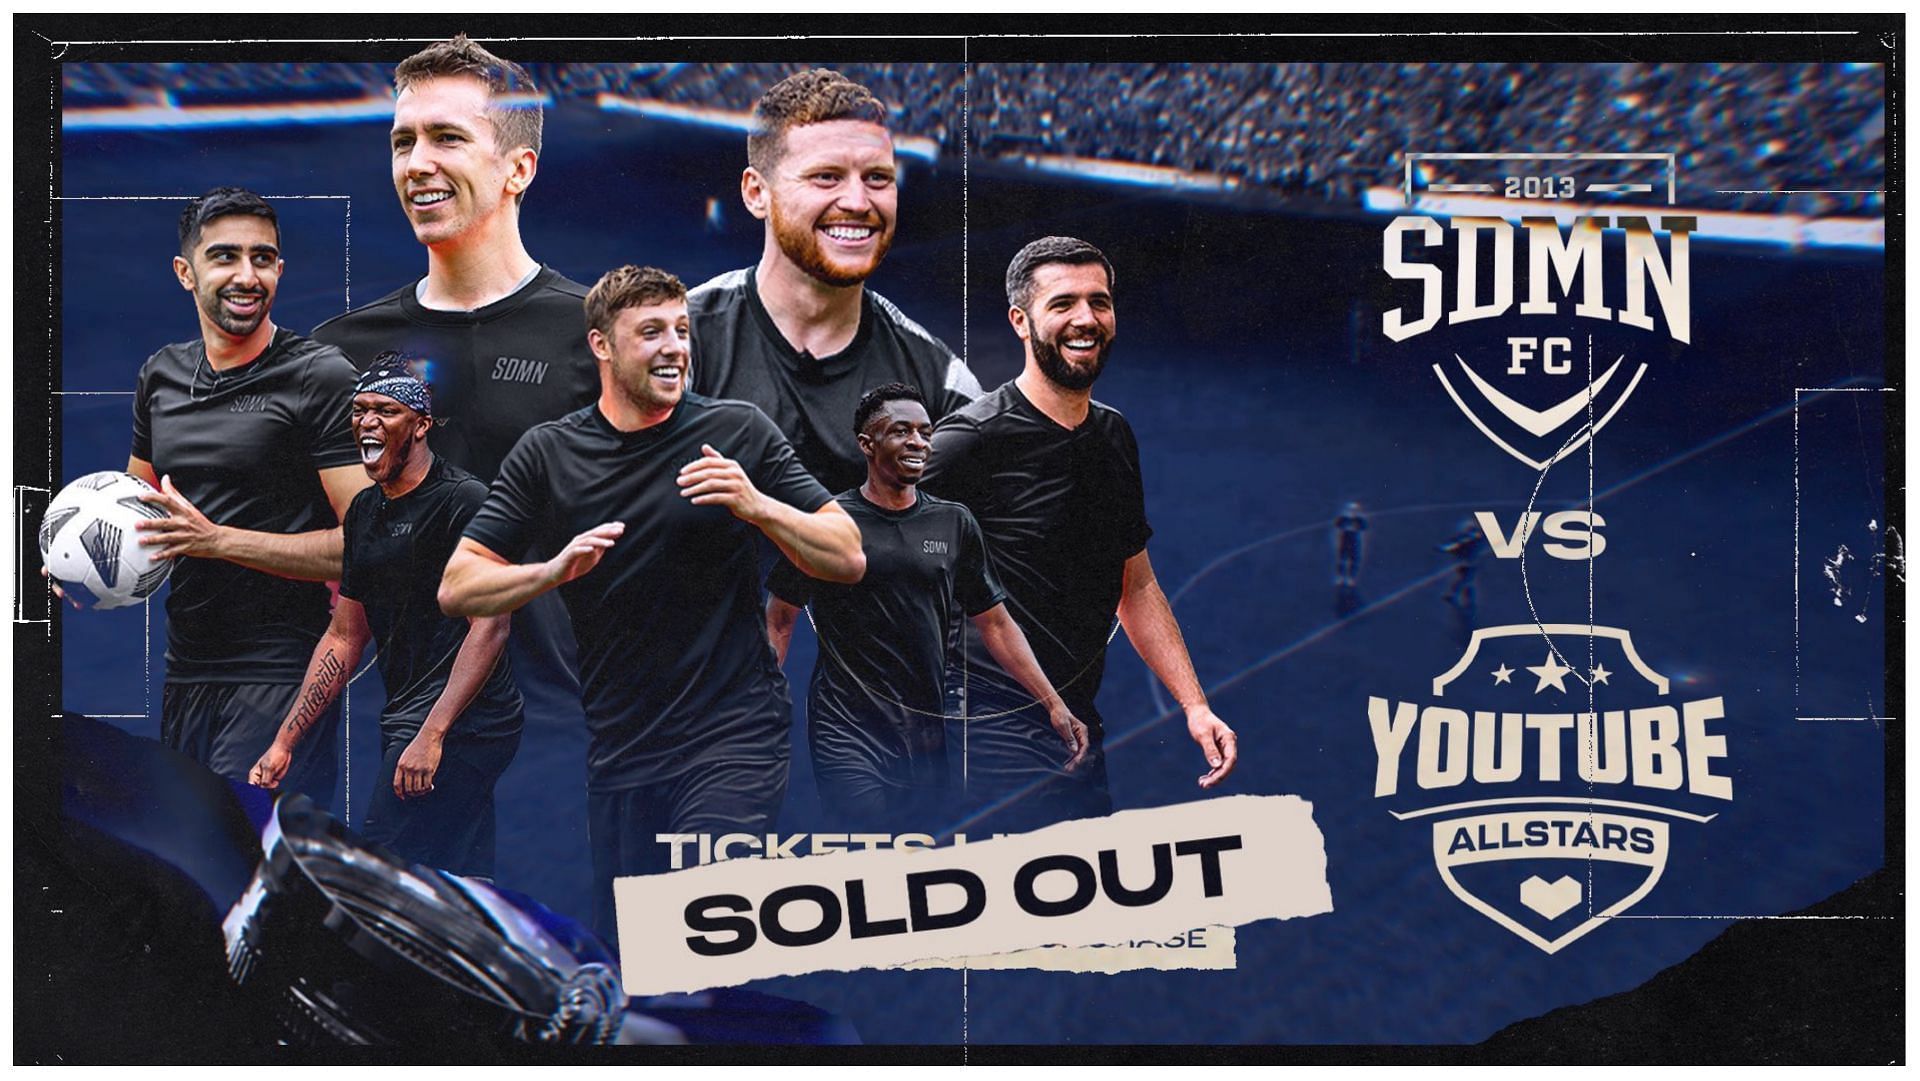 The fourth Sidemen Charity Match entertained millions of fans around the world (Image via Sidemen on Twitter)